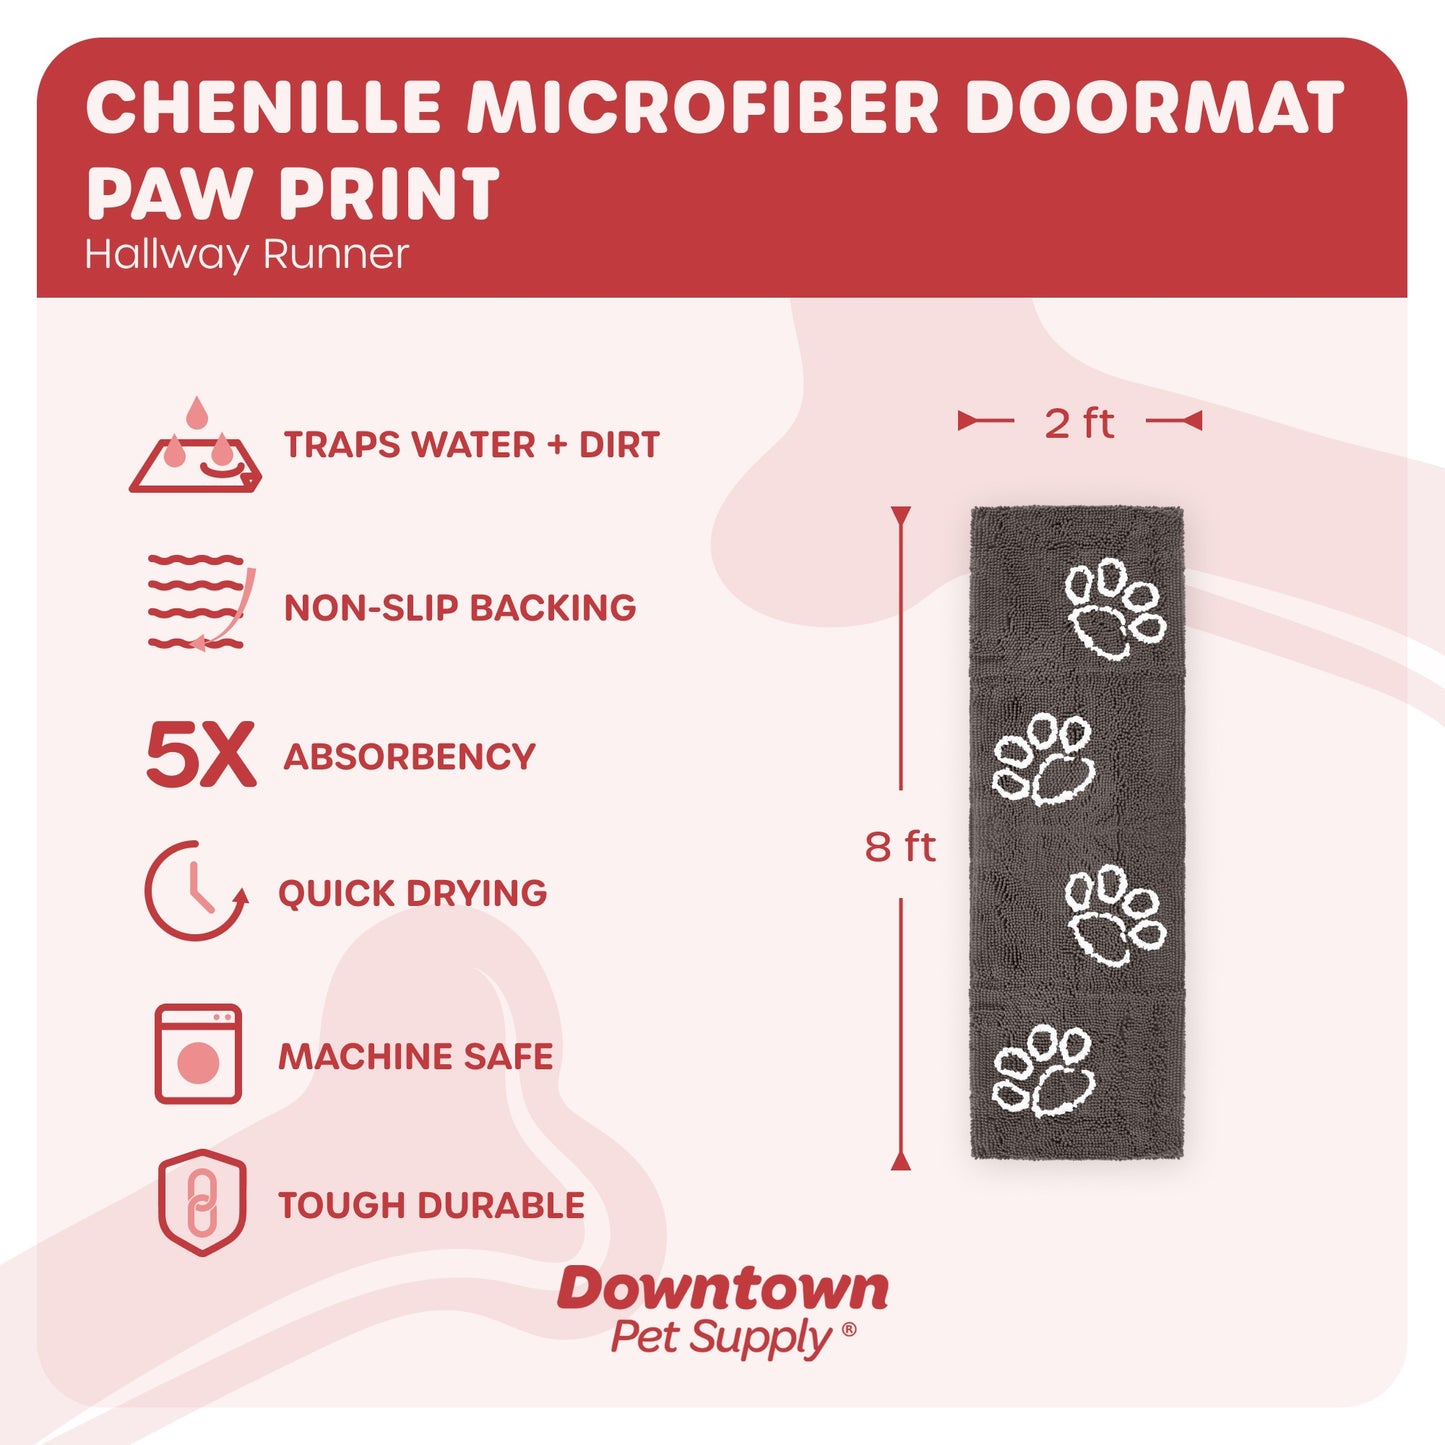 My Doggy Place - Ultra Absorbent Microfiber Dog Pet Door Mat, Durable, Quick Drying, Washable, Prevent Mud Dirt, Keep Your House Clean (Paw Print Design)